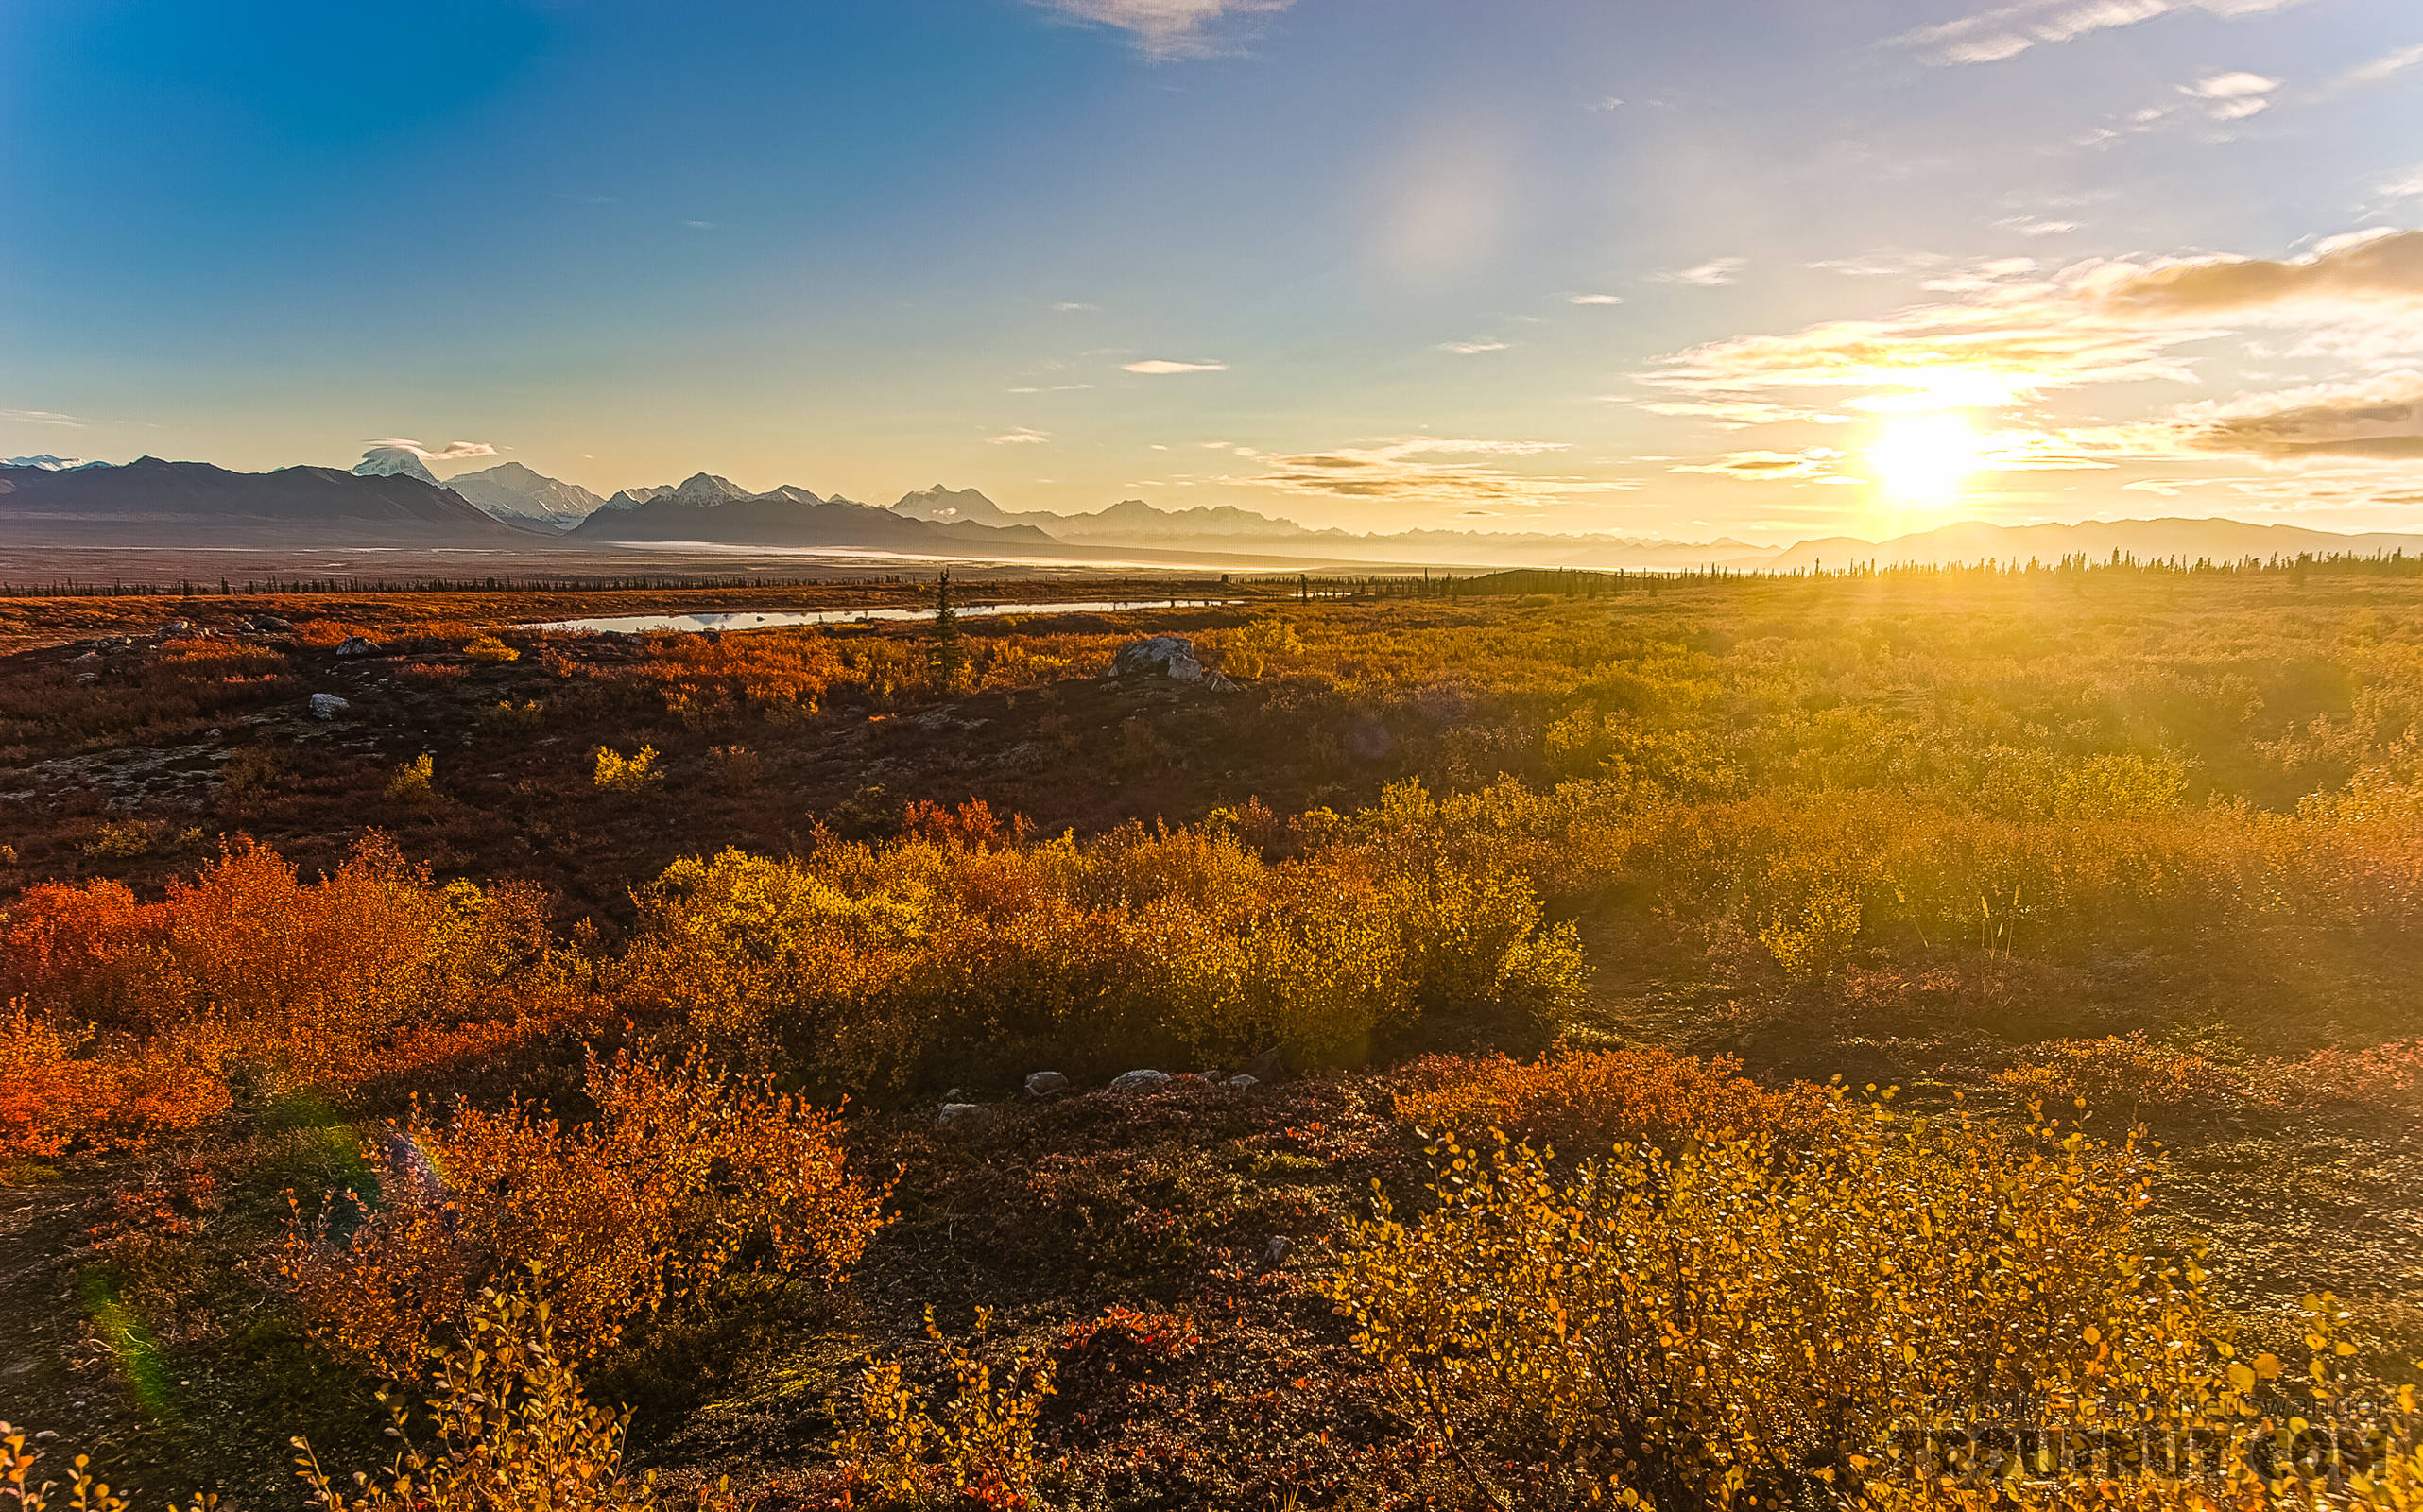 Sunrise. A promising start to the weekend From Denali Highway in Alaska.